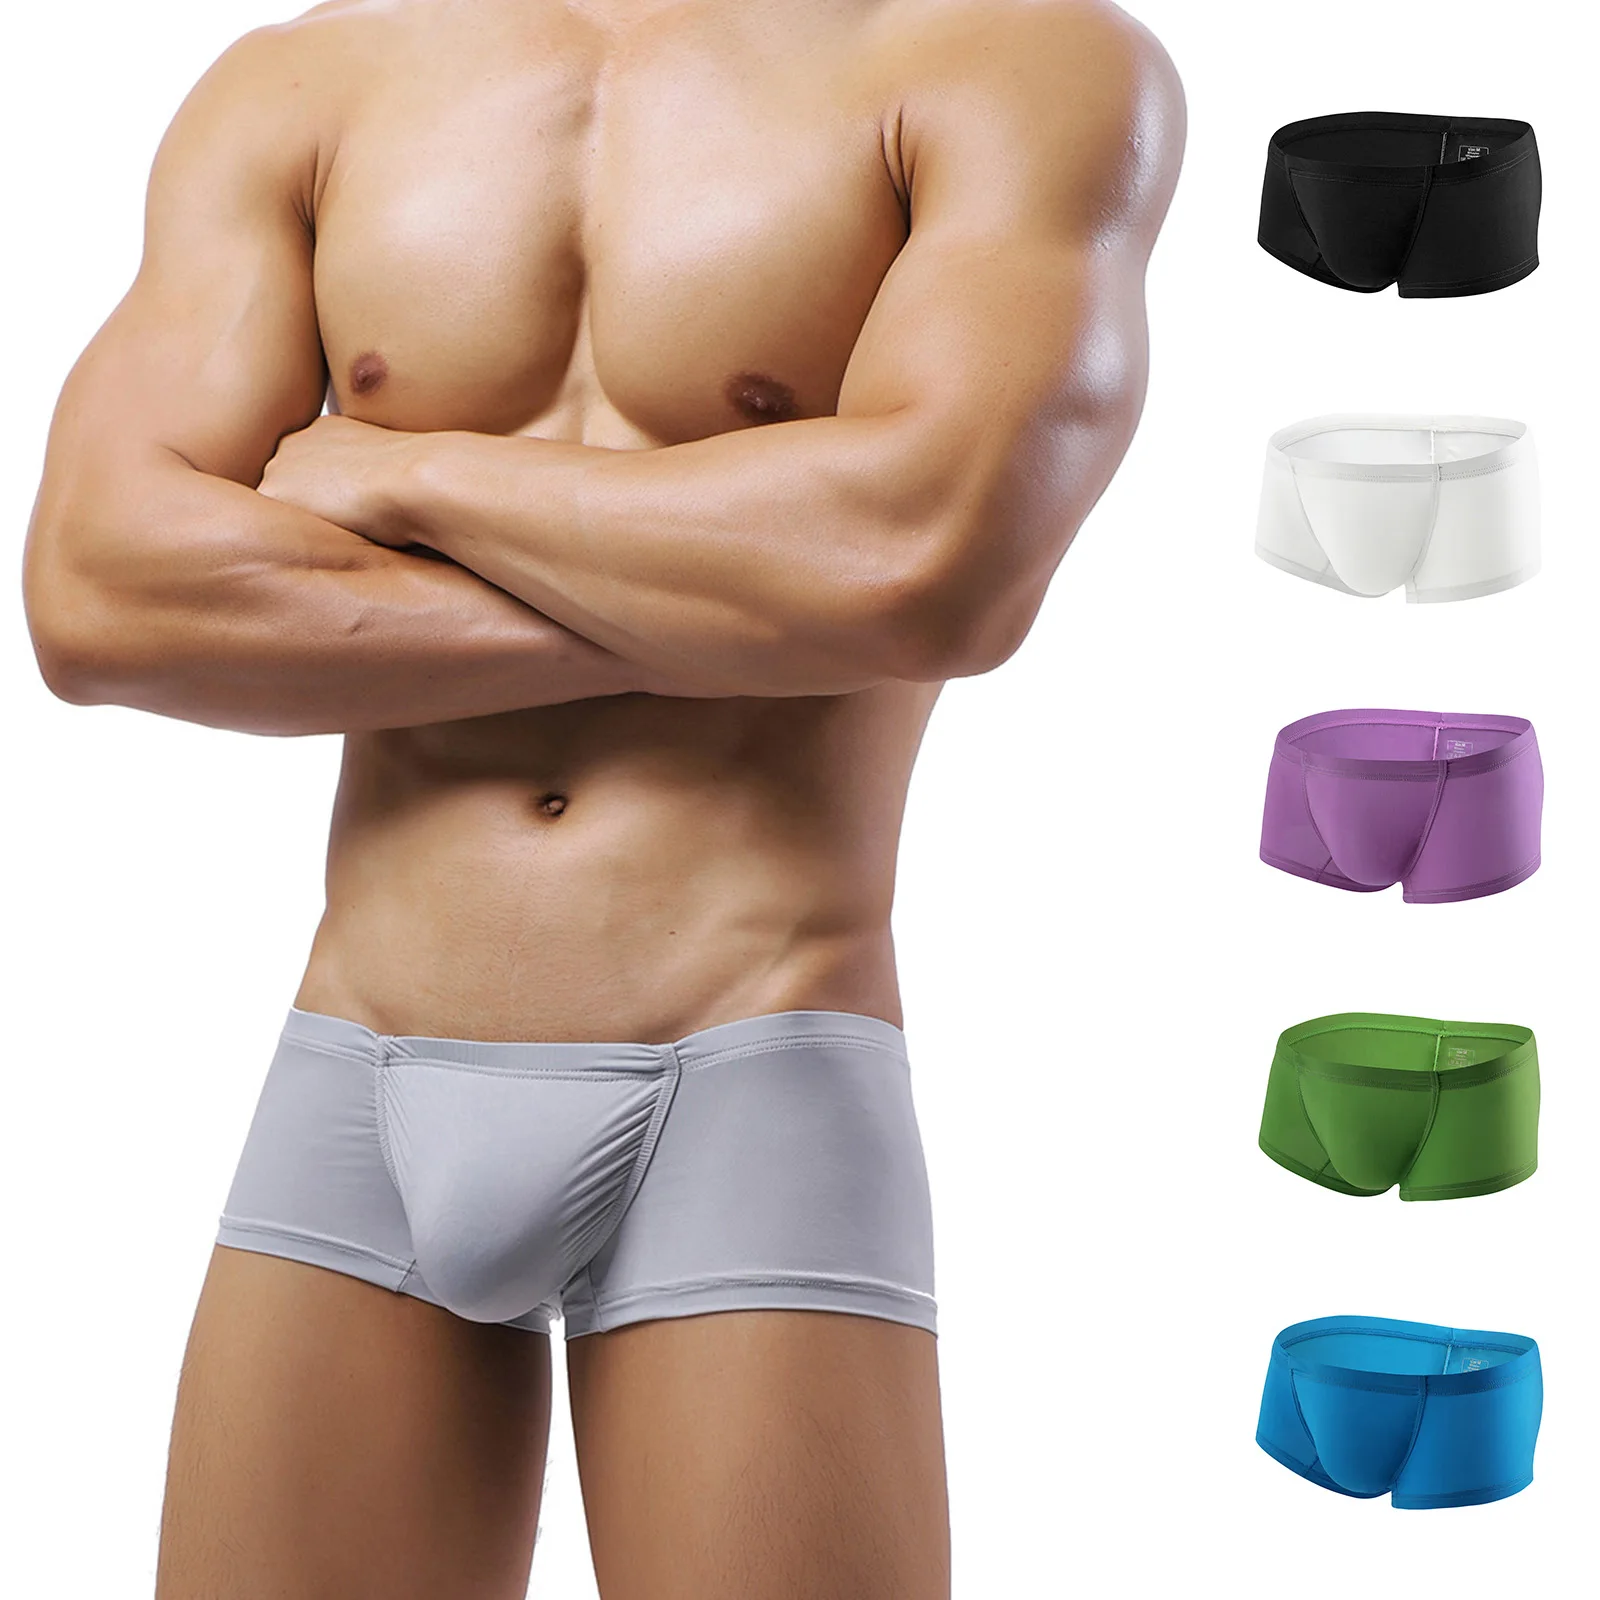 

CLEVER-MENMODE Men's Sexy Panties Male Underwear Translucent Man Boxer Shorts U Convex See Through Breathable Comfy Underpants